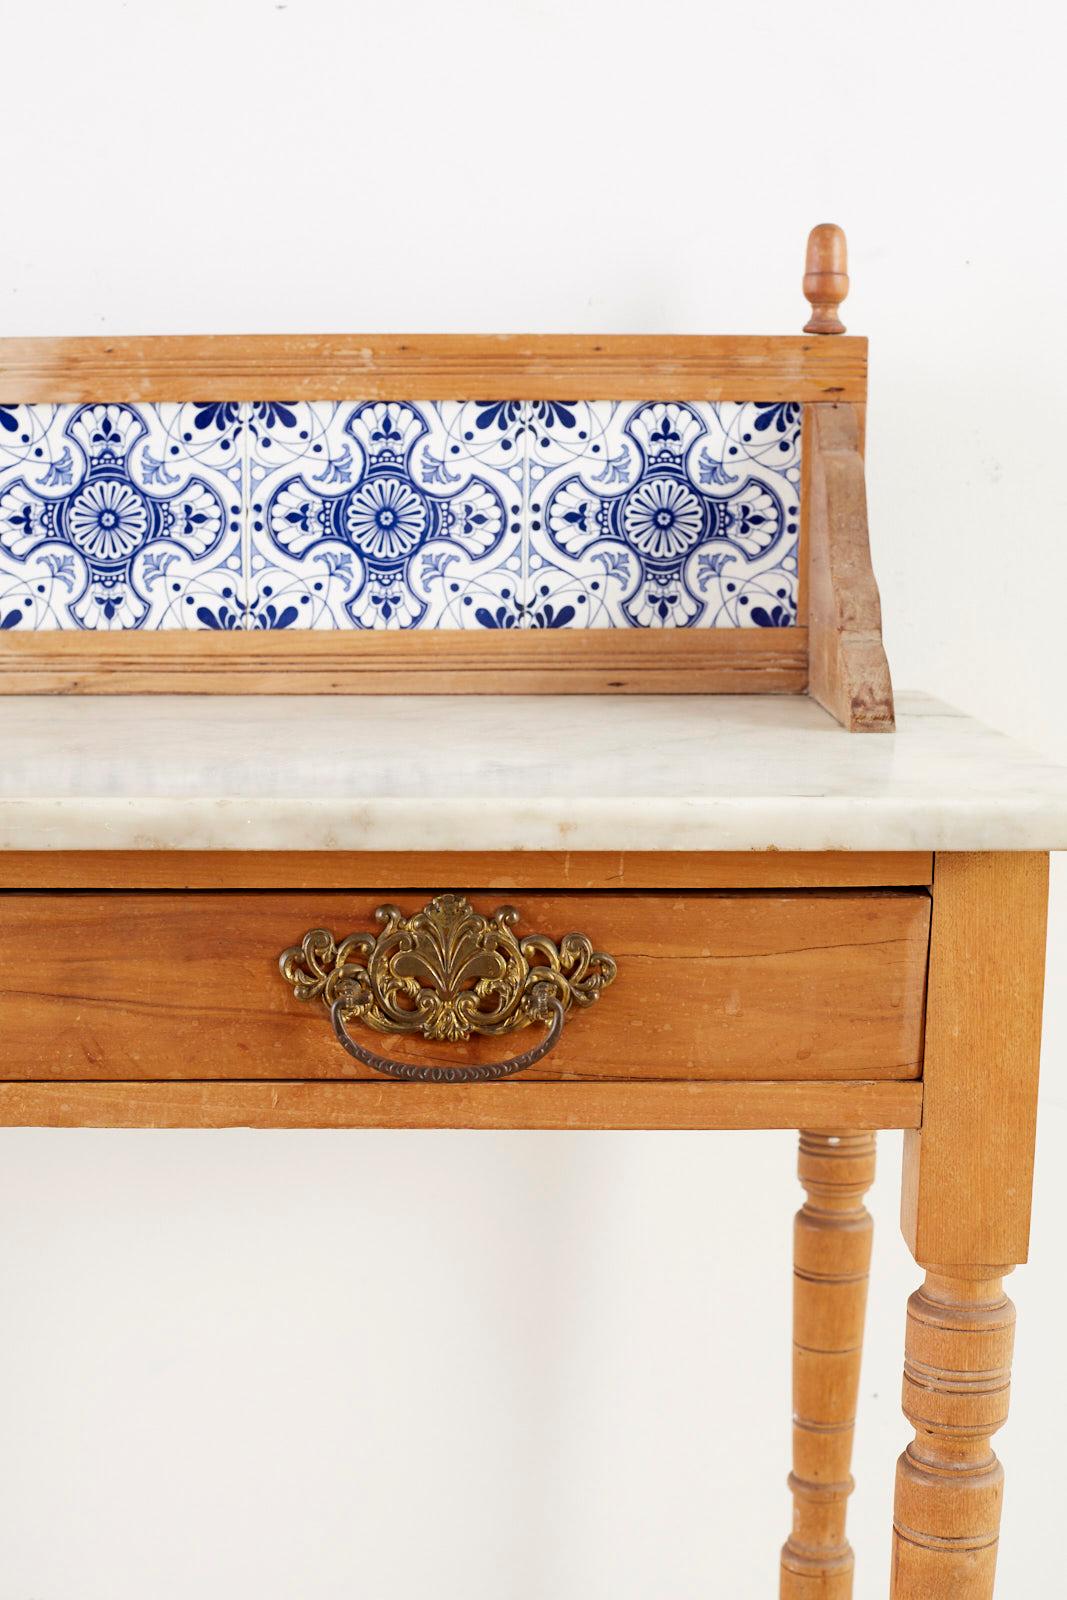 Hand-Crafted Country Pine Marble-Top Table with Blue and White Tiles